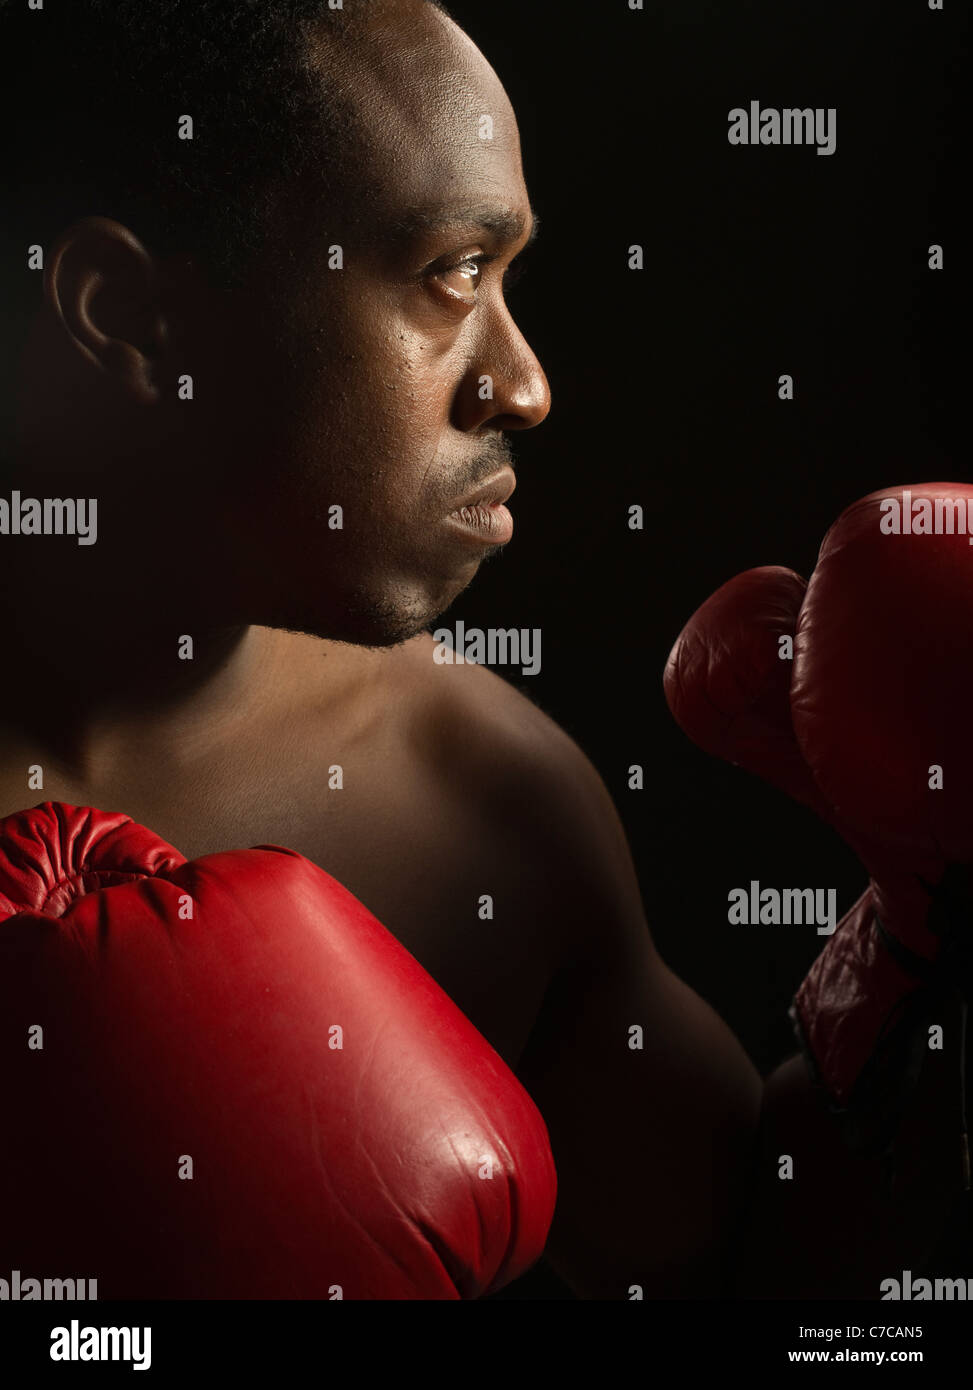 Portrait of boxer with boxing gloves Stock Photo